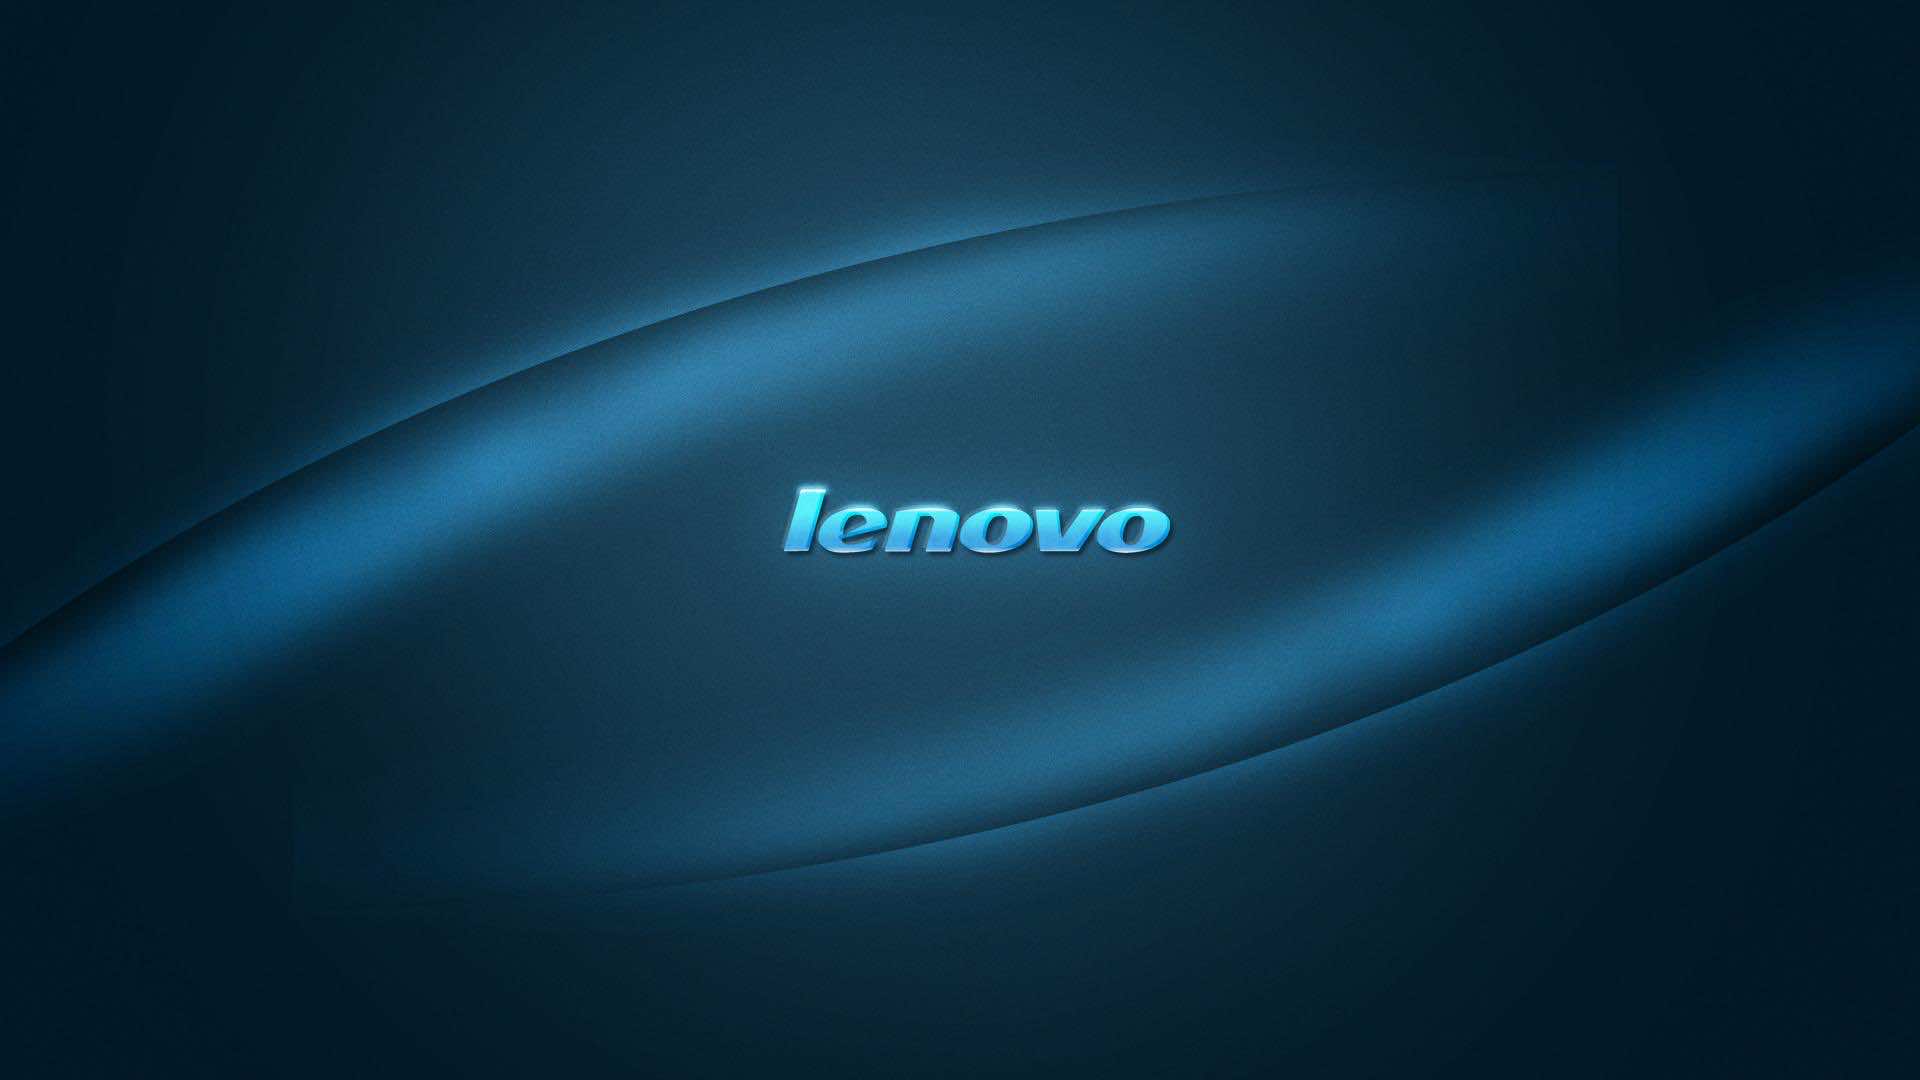 Lenovo Wallpaper Collection In Hd For Download